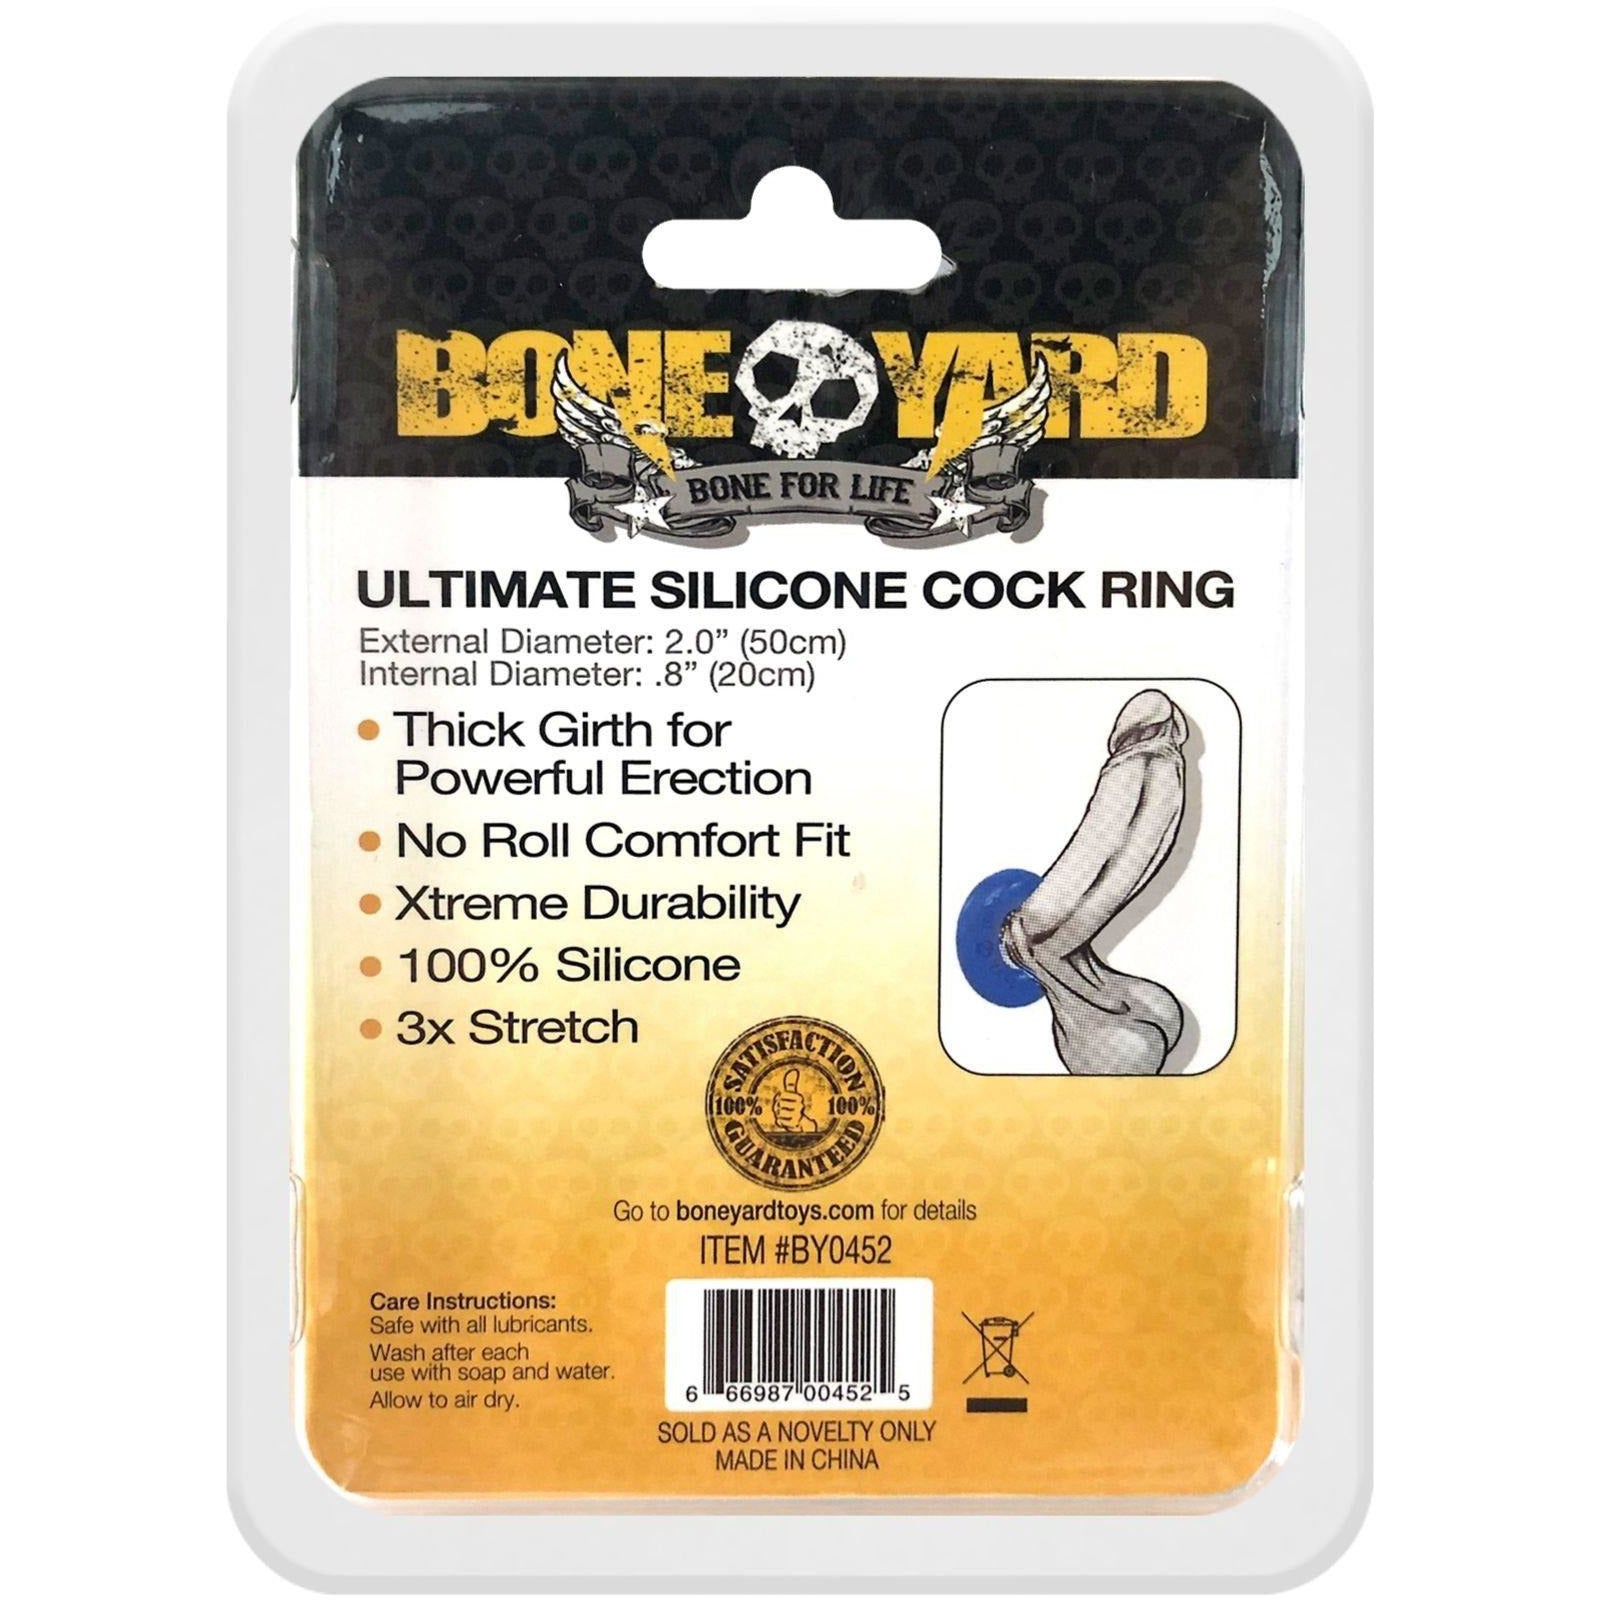 Ultimate Silicone Cock Ring Blue - C1RB2B